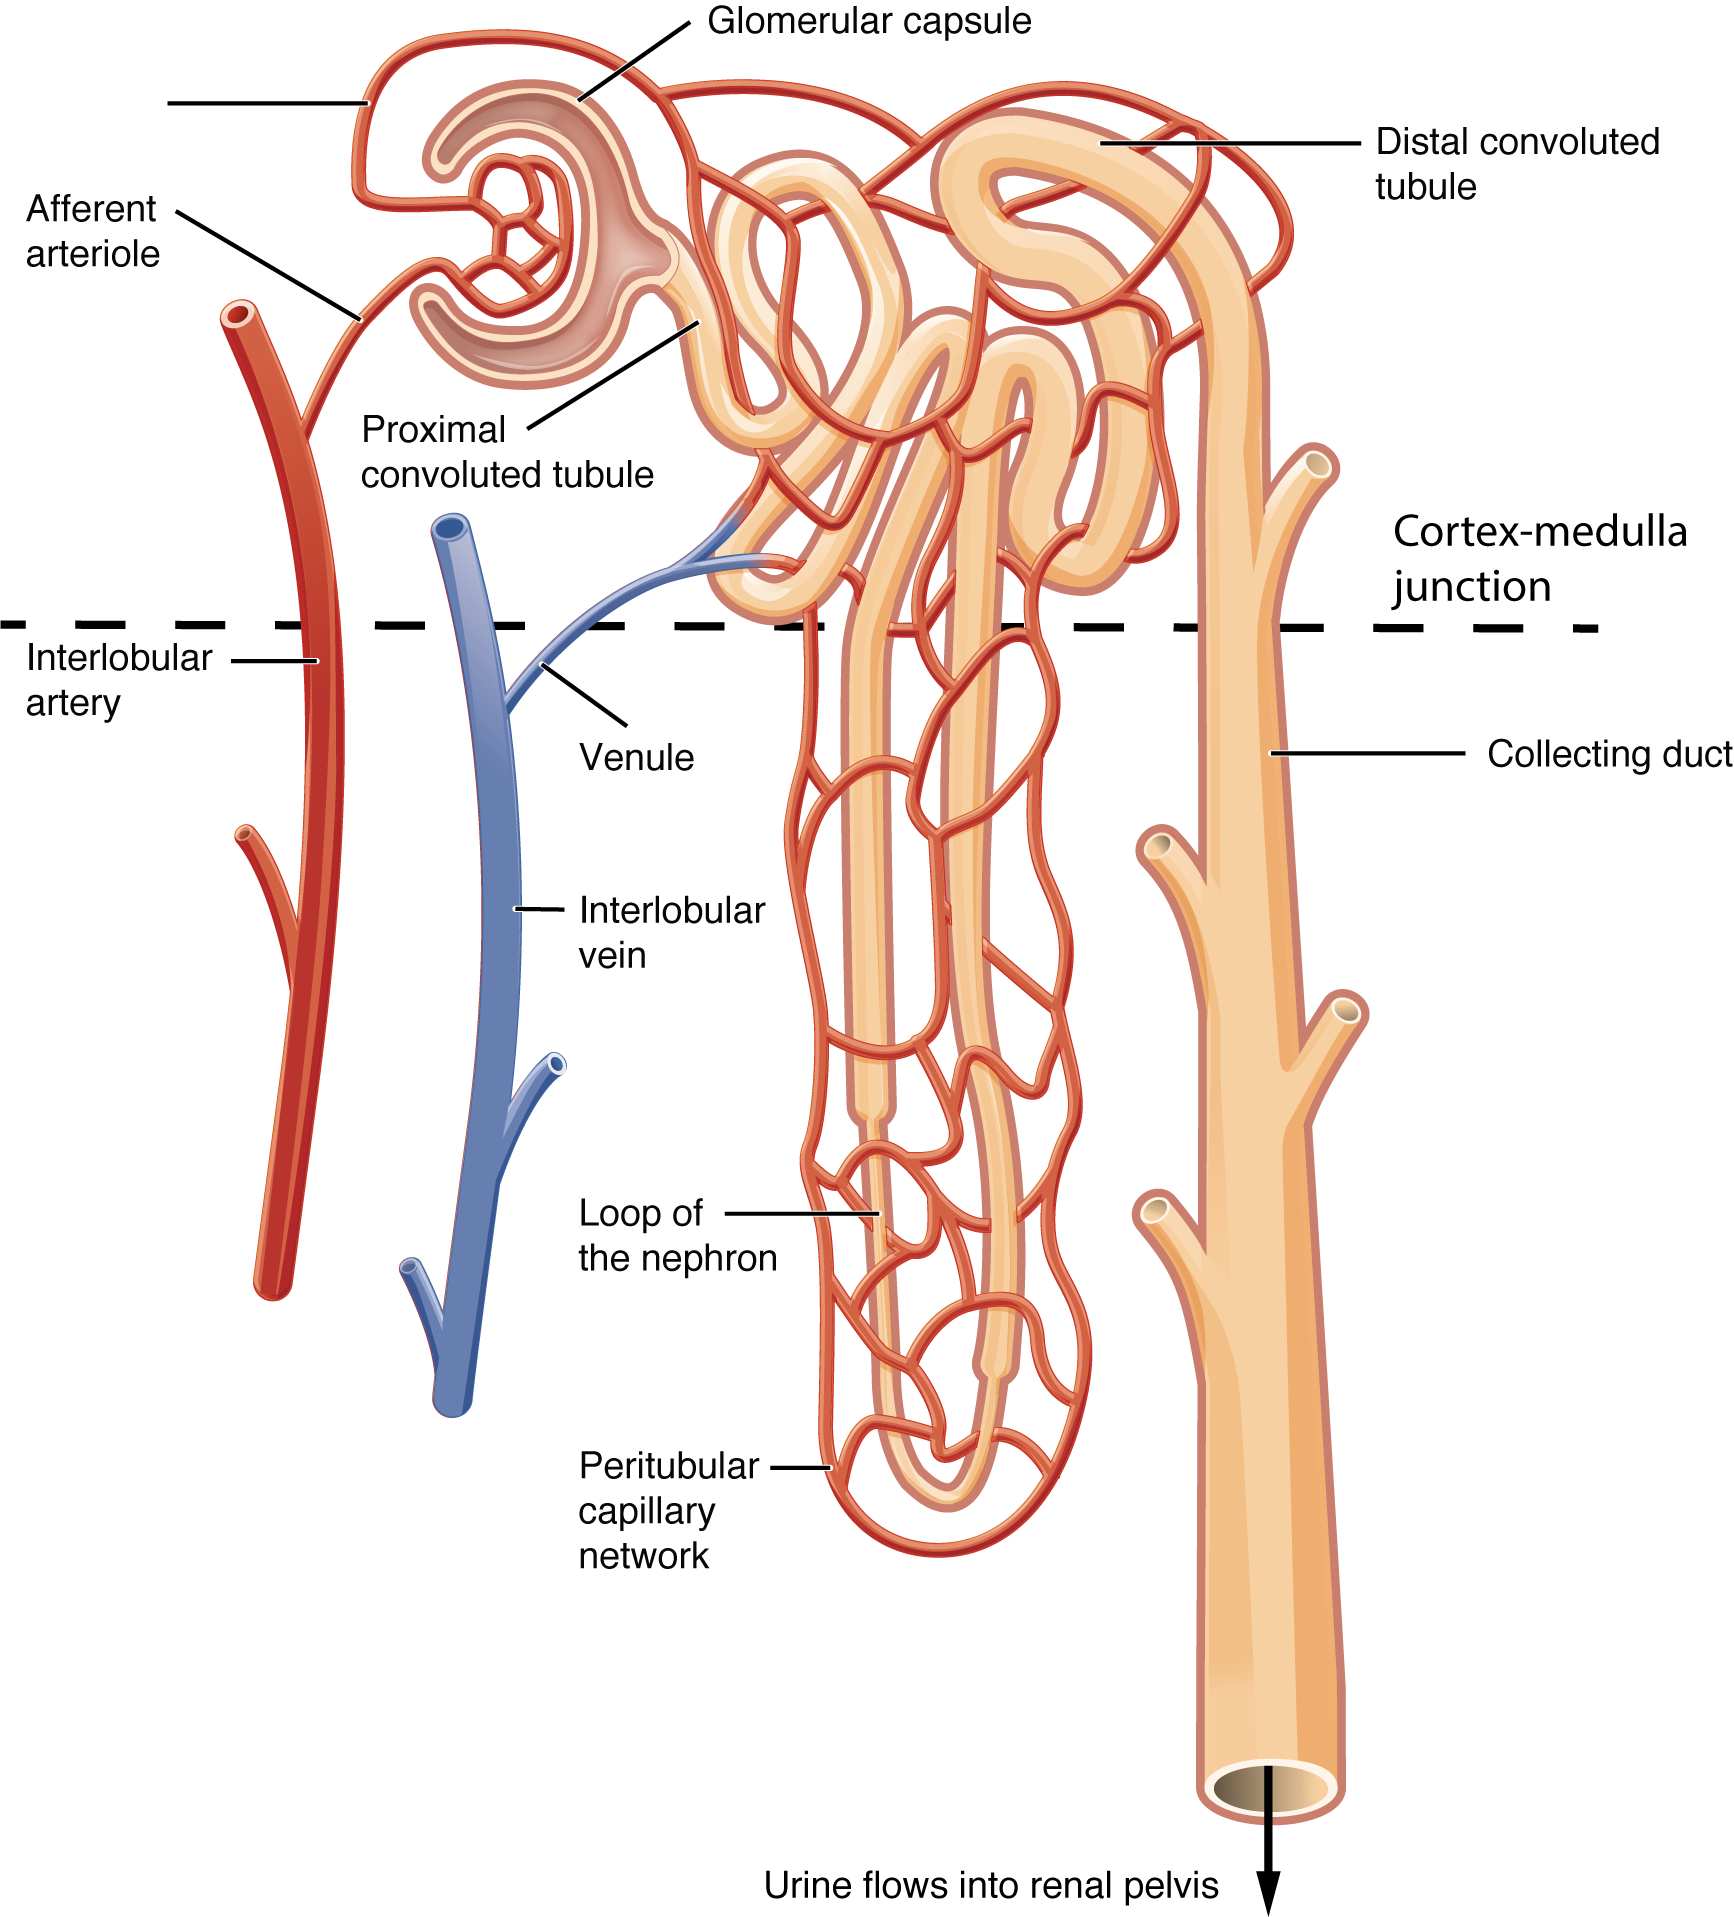 This image shows the blood vessels and the direction of blood flow in the nephron.